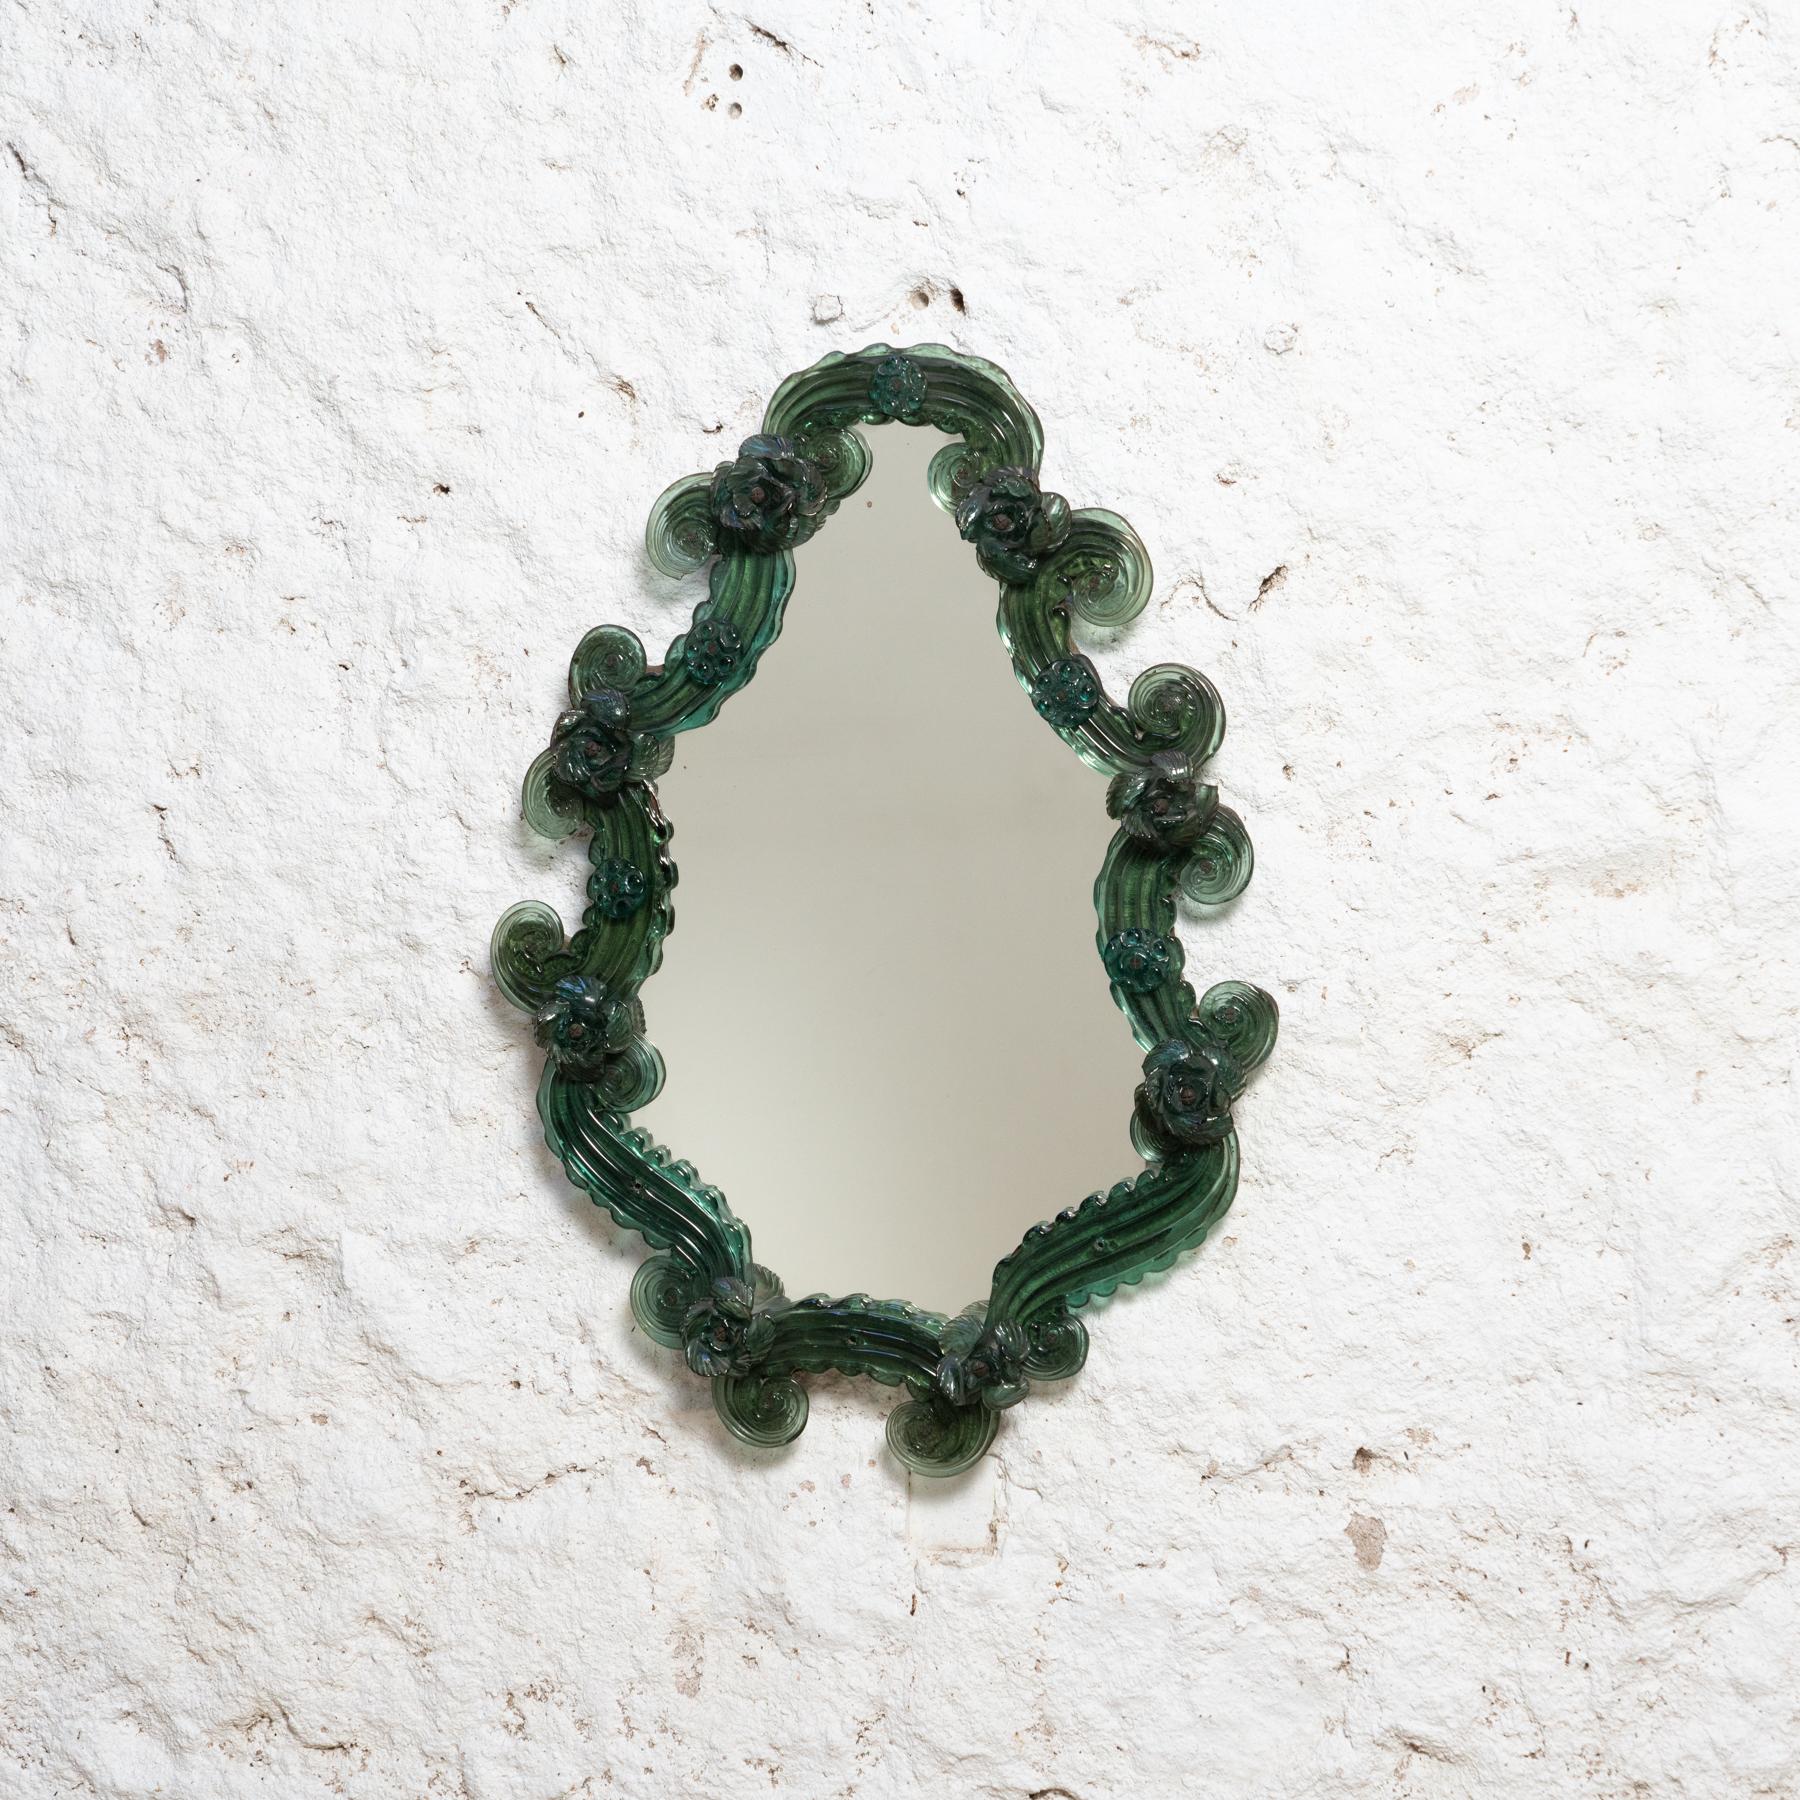 Venetian green mirror in Murano glass.

Traditionally manufactured in Italy, circa 1920.

By unknown designer.

In original condition with minor wear consistently of age and use, preserving a beautiful patina.

Material:
Murano